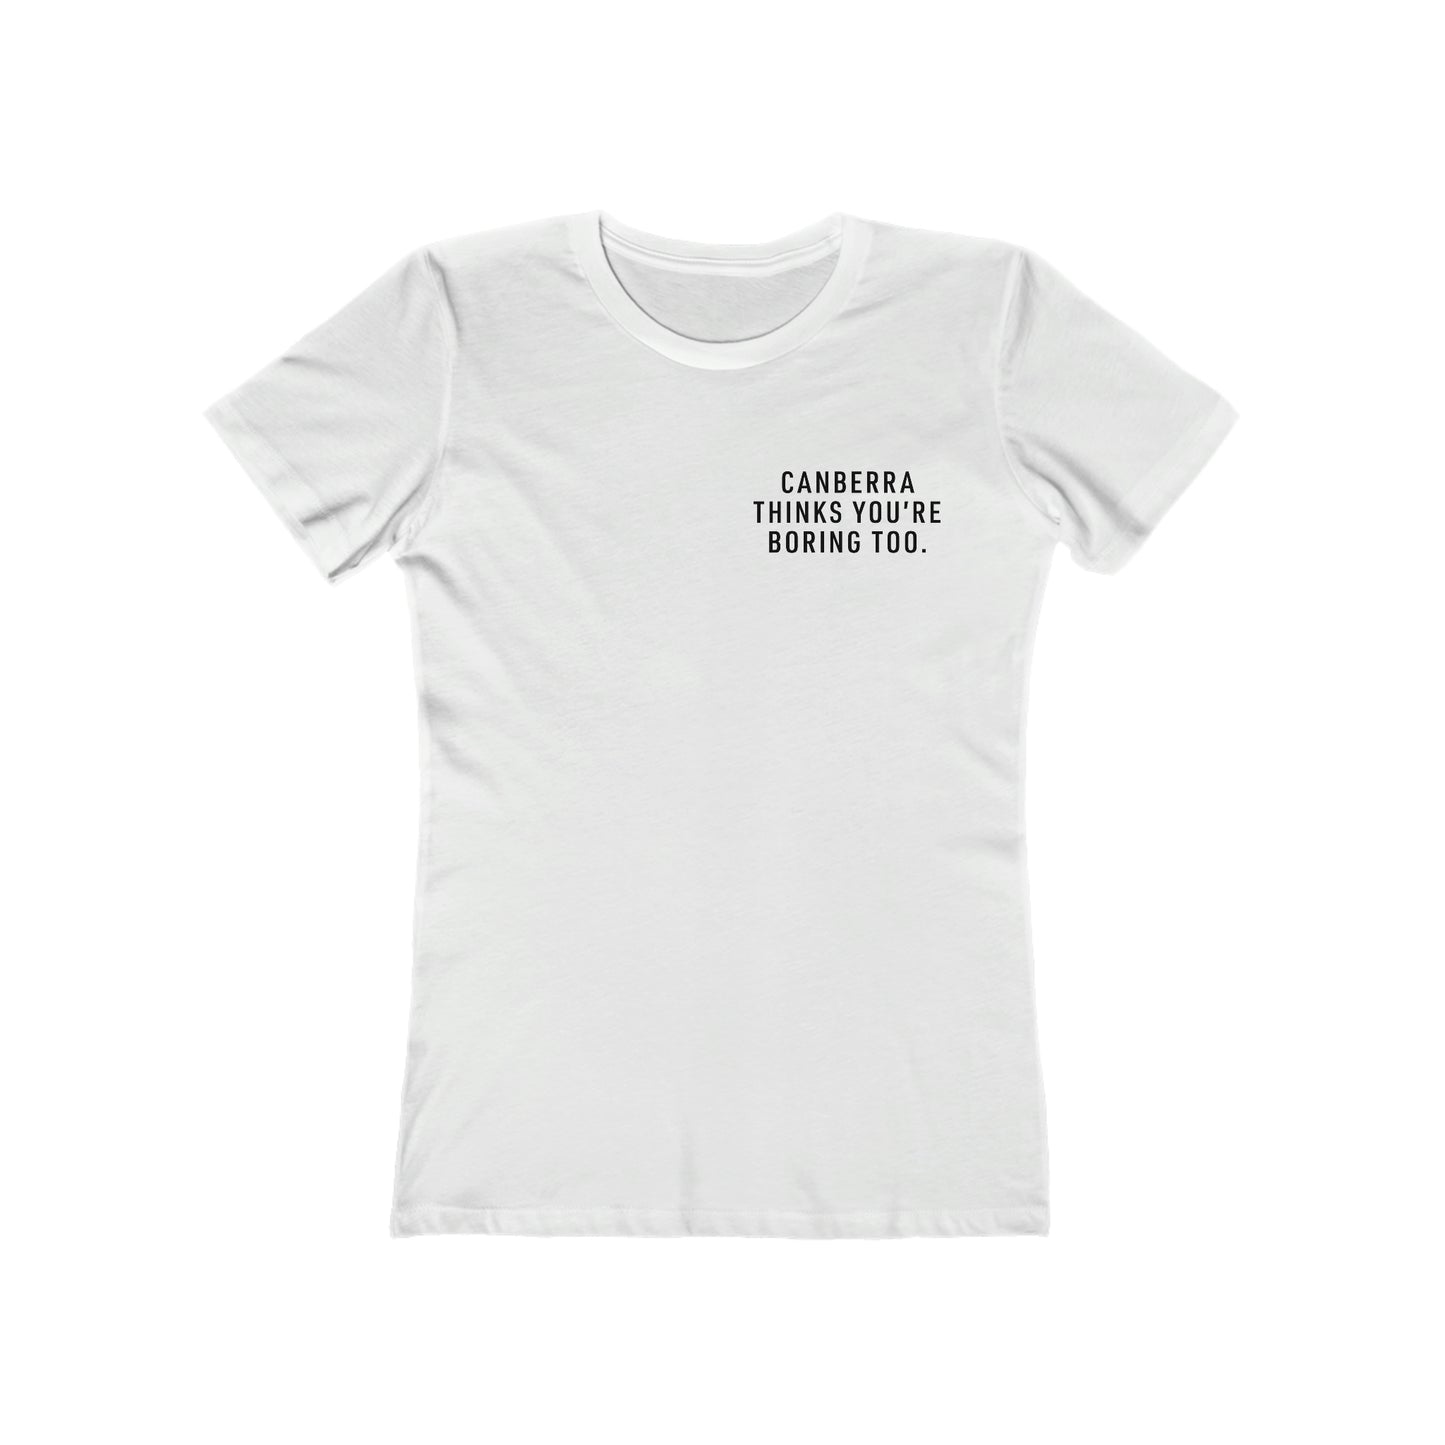 Canberra Thinks You're Boring Too Women's T-Shirt